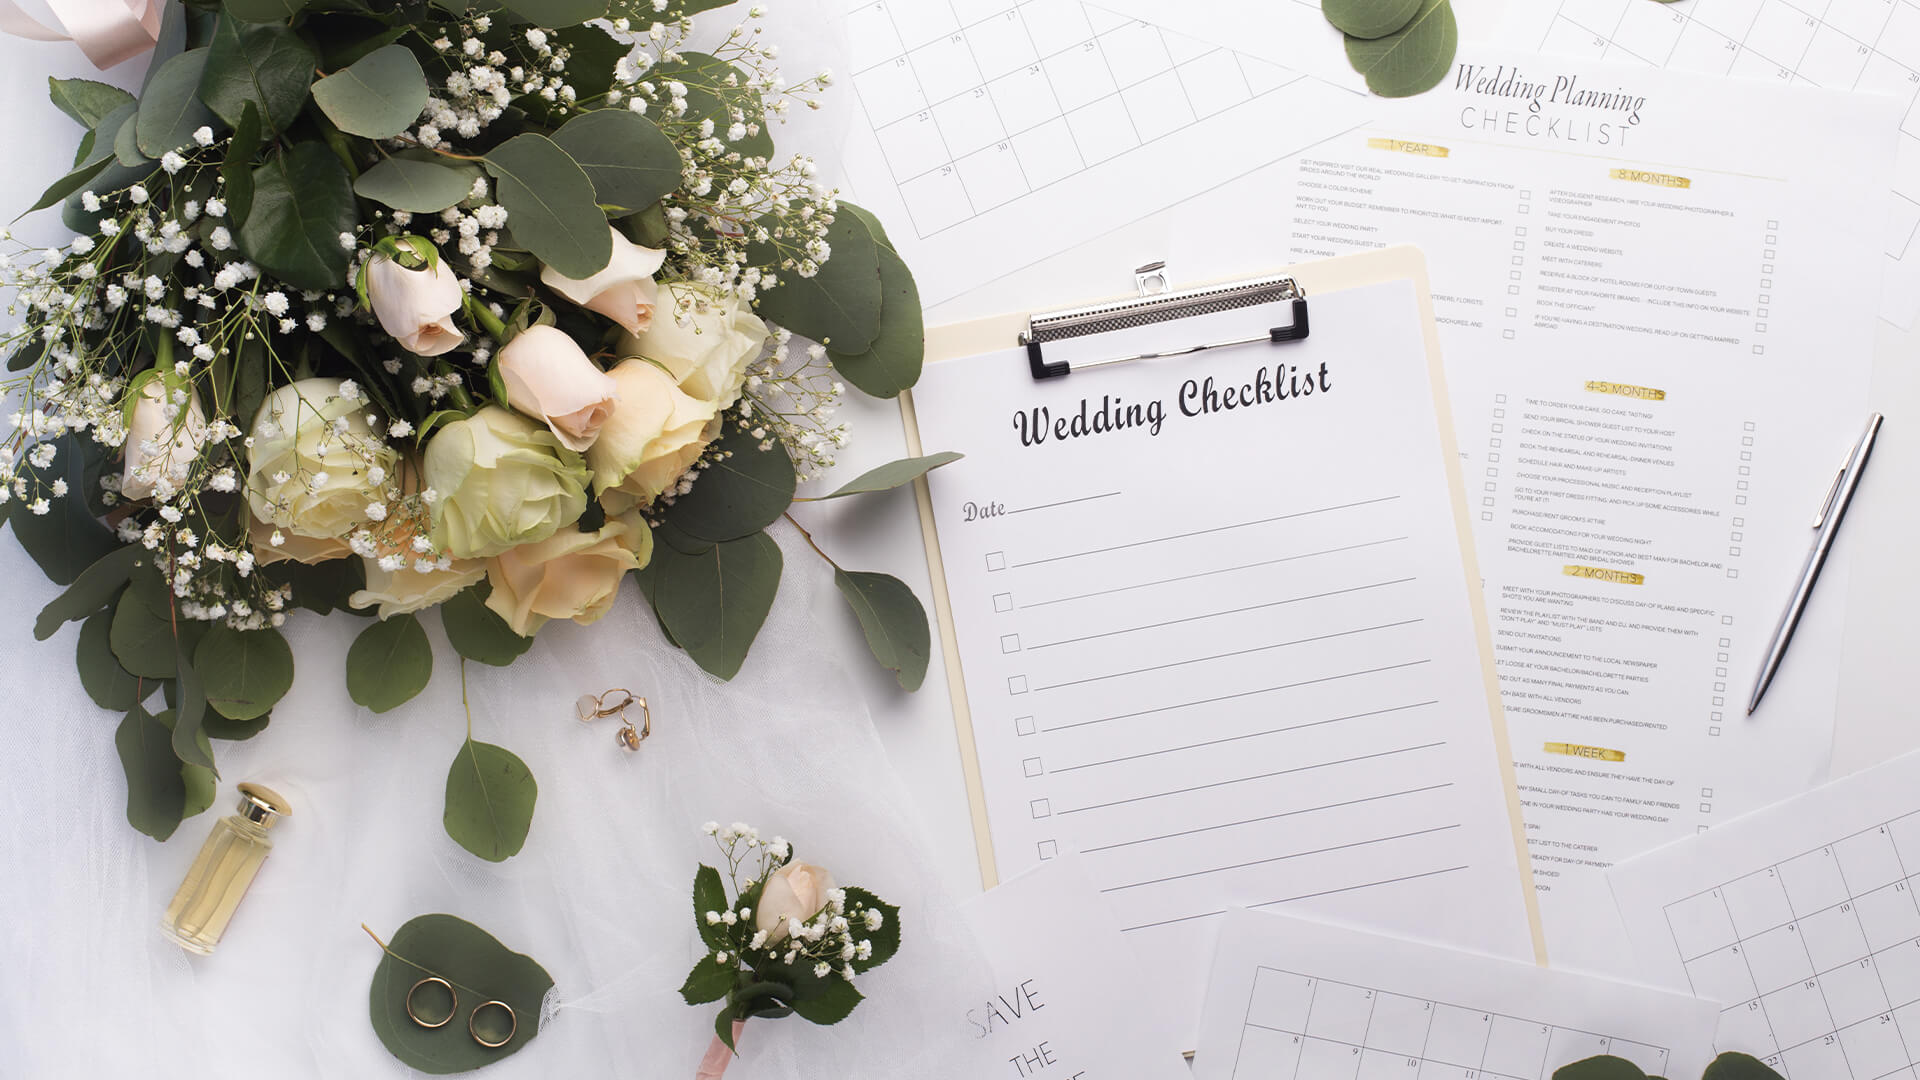 Bouquet of white and pink roses with a wedding checklist on a clipboard